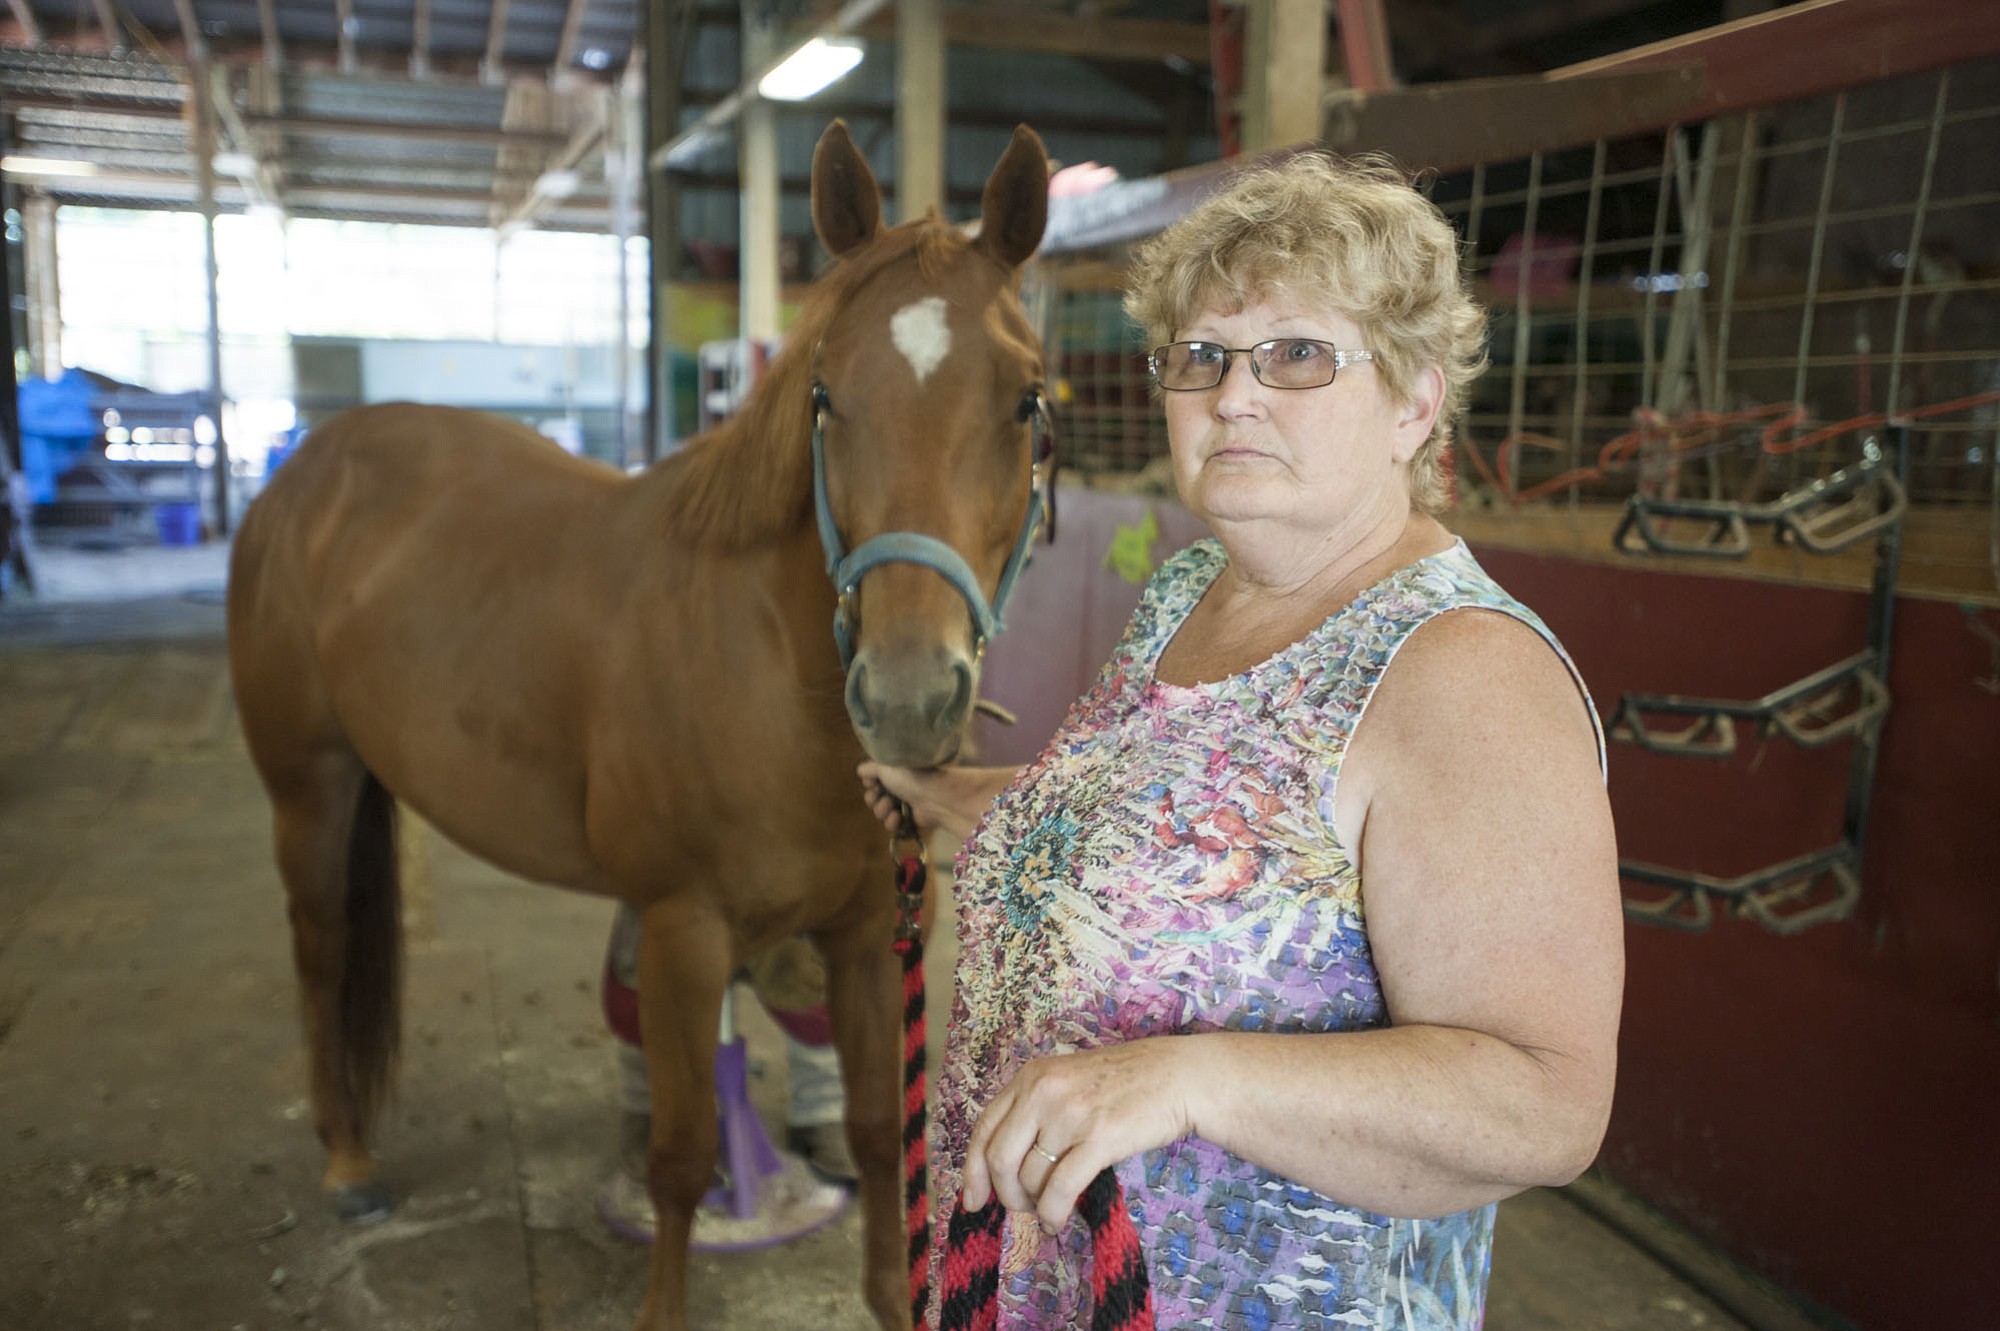 Nancy Elder got to her Brush Prairie stables early Wednesday morning, but waited until other people arrived to search the stalls and barn for an escaped inmate.